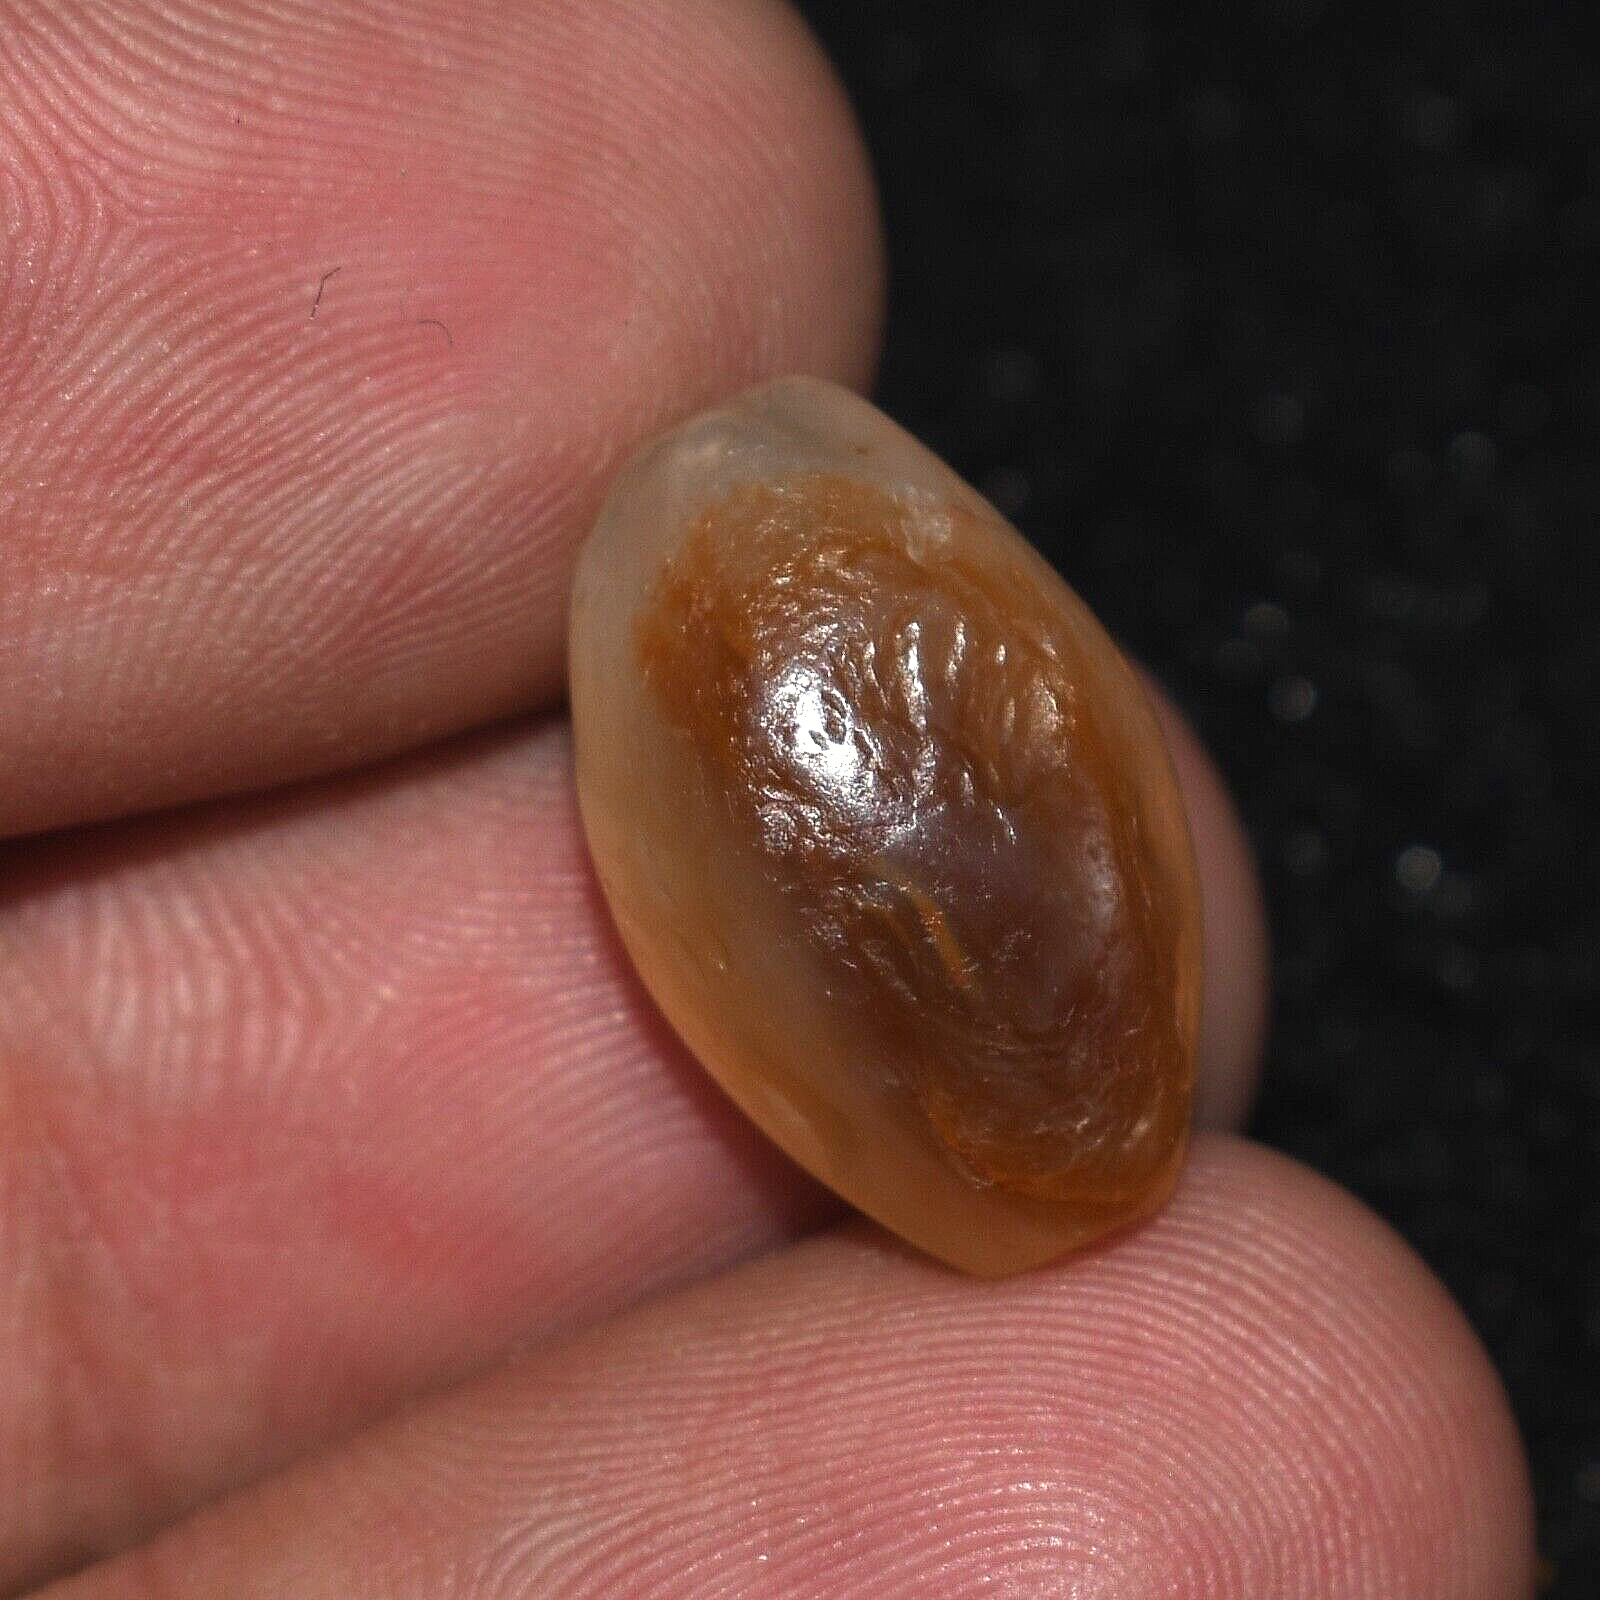 Genuine Ancient Banded Agate Stone Bead In Perfect Condition over 2000 Years Old